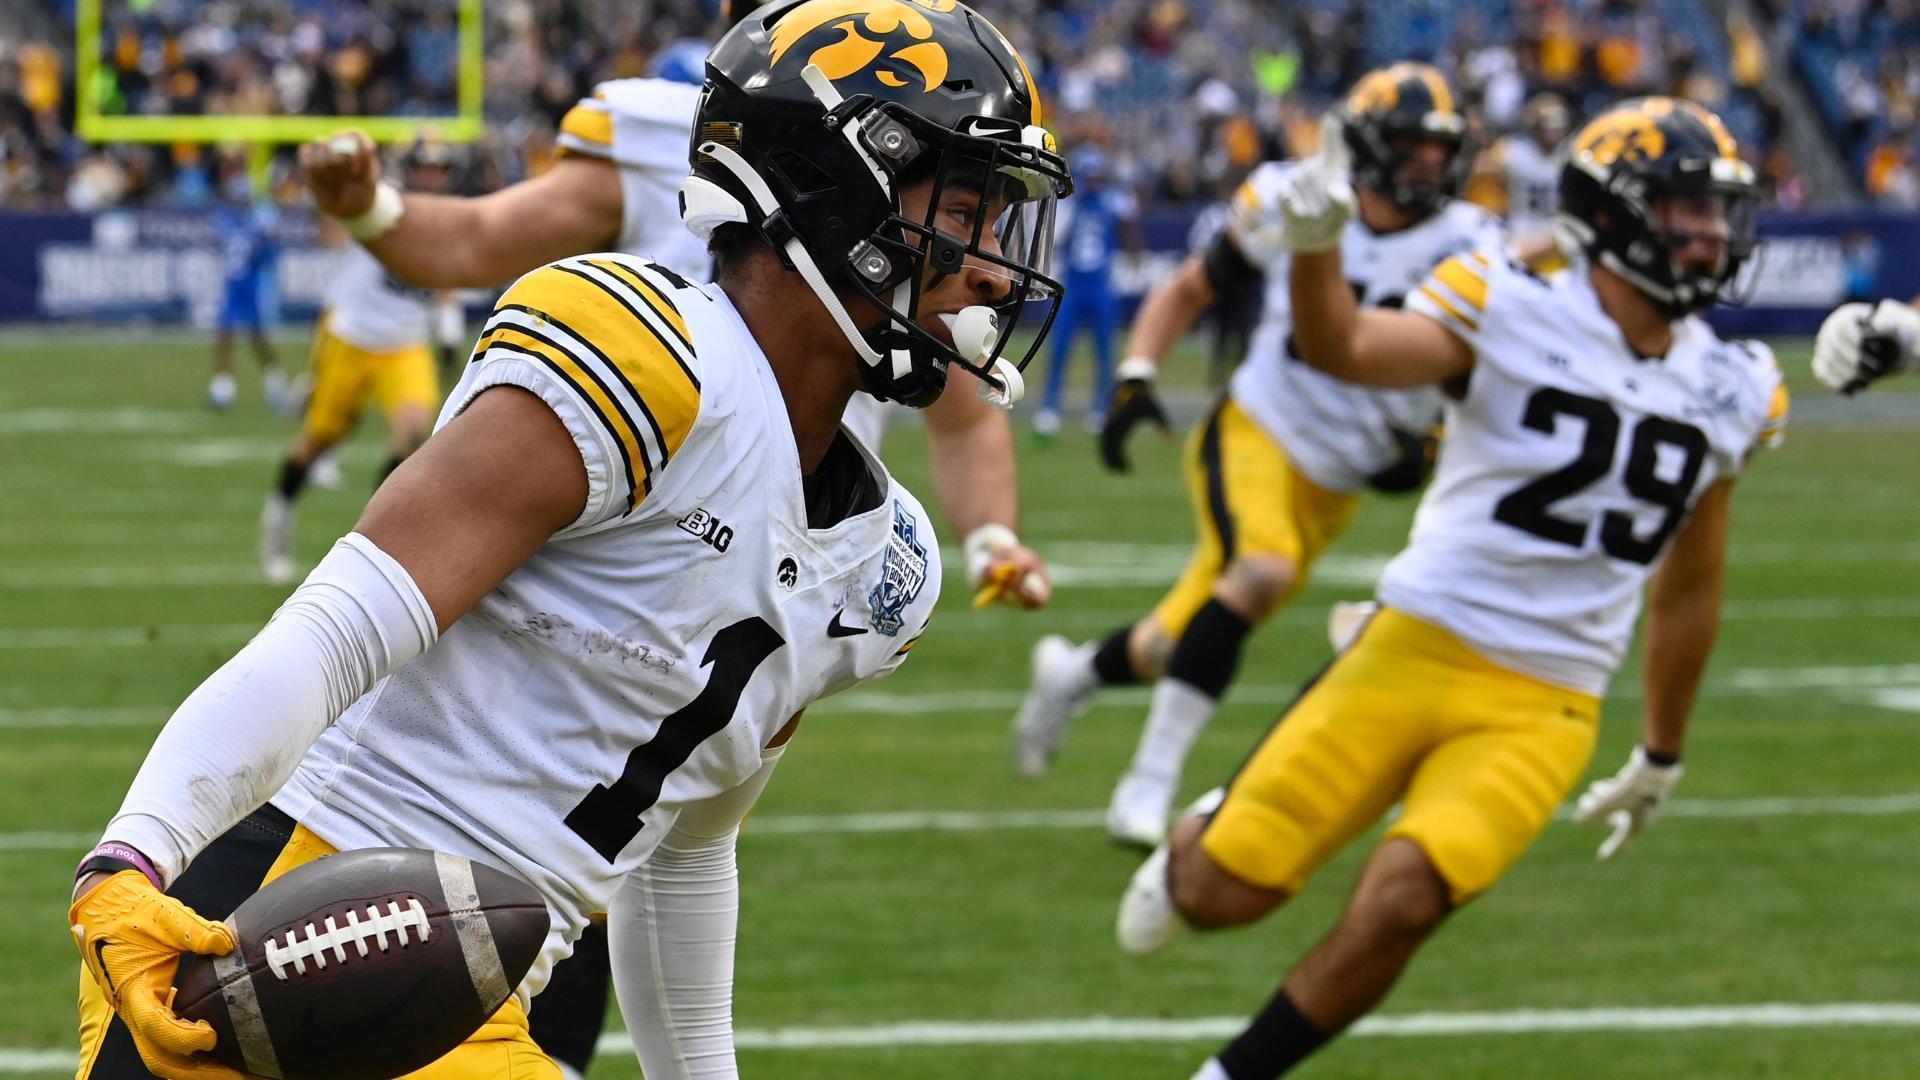 Iowa Hawkeyes Scores, Stats and Highlights - ESPN (UK)